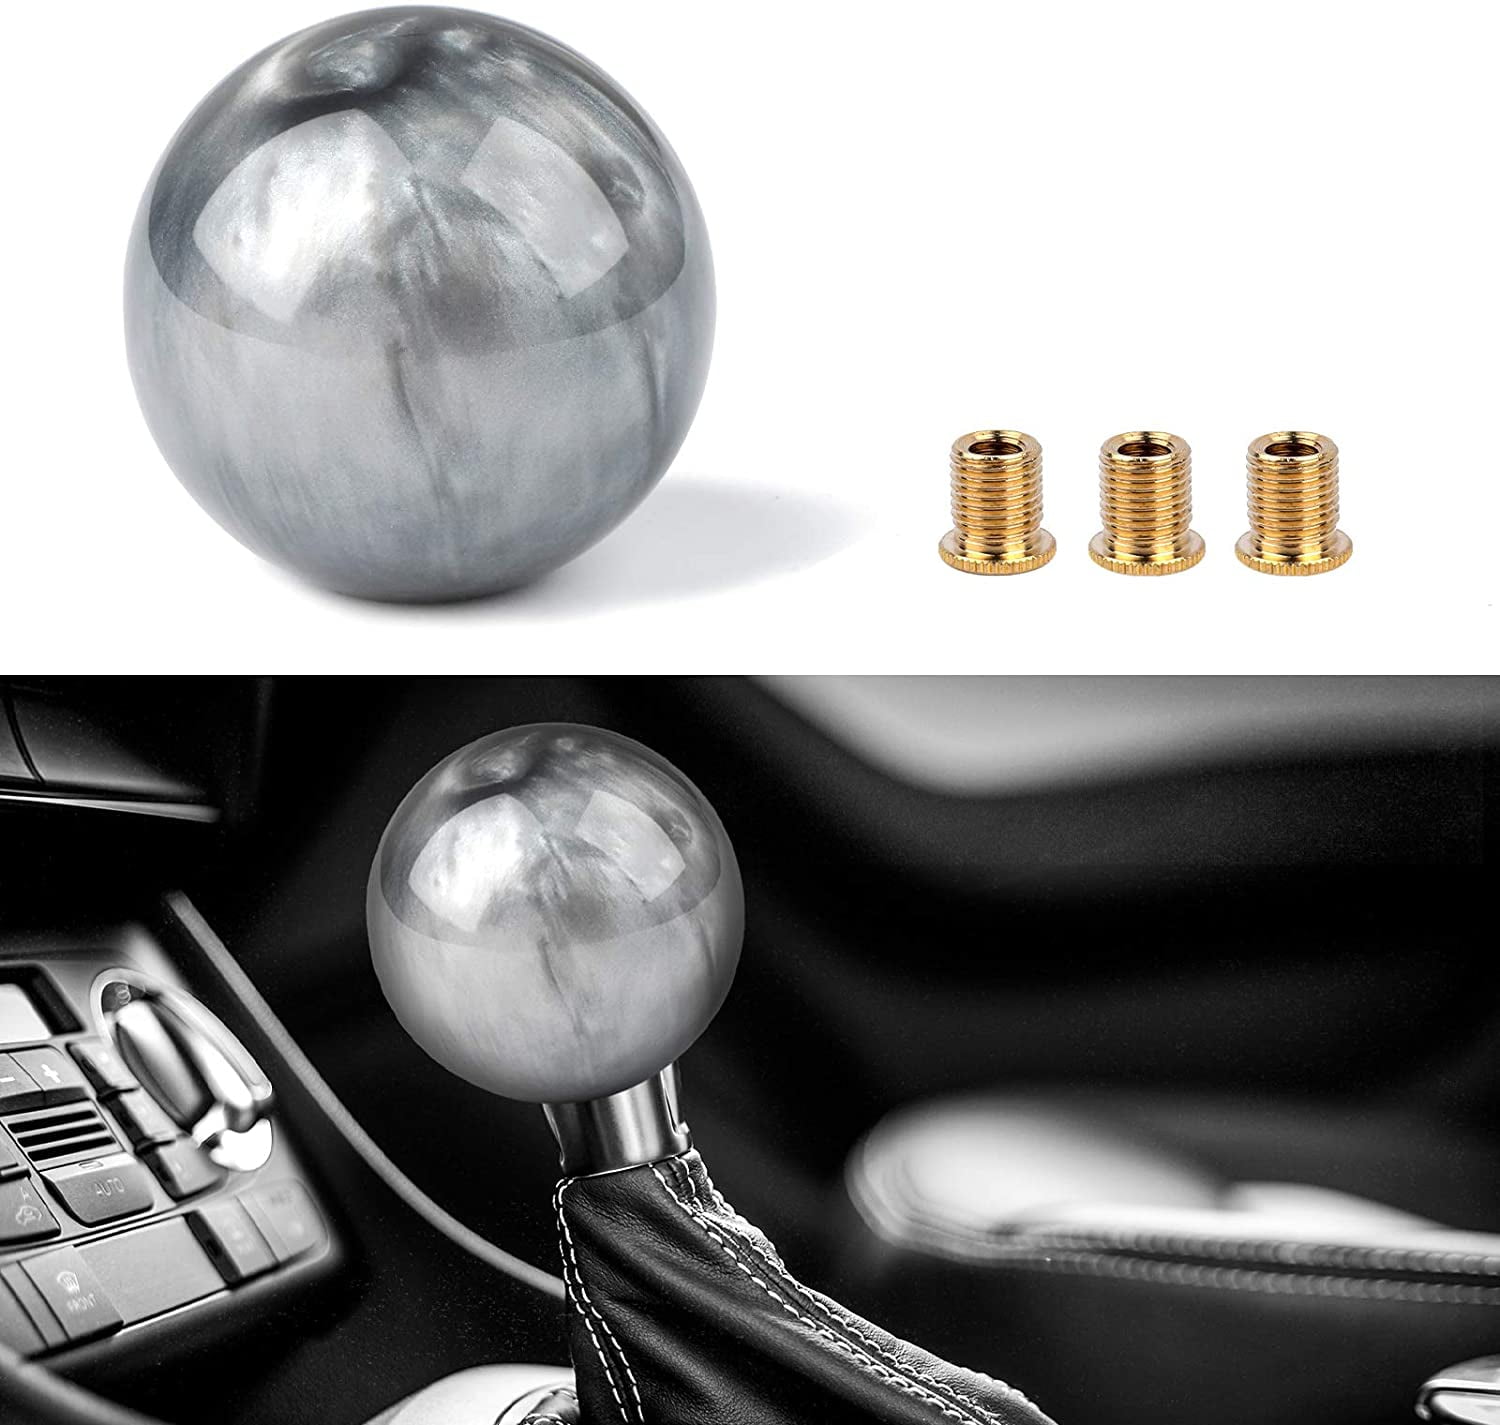 Gray YASUOA Marble Style Round Ball Gear Shift Knob Acrylic Shifter Knobs Stick Shift Knobs with 3 Adapters Universal Fit for Manual Car 